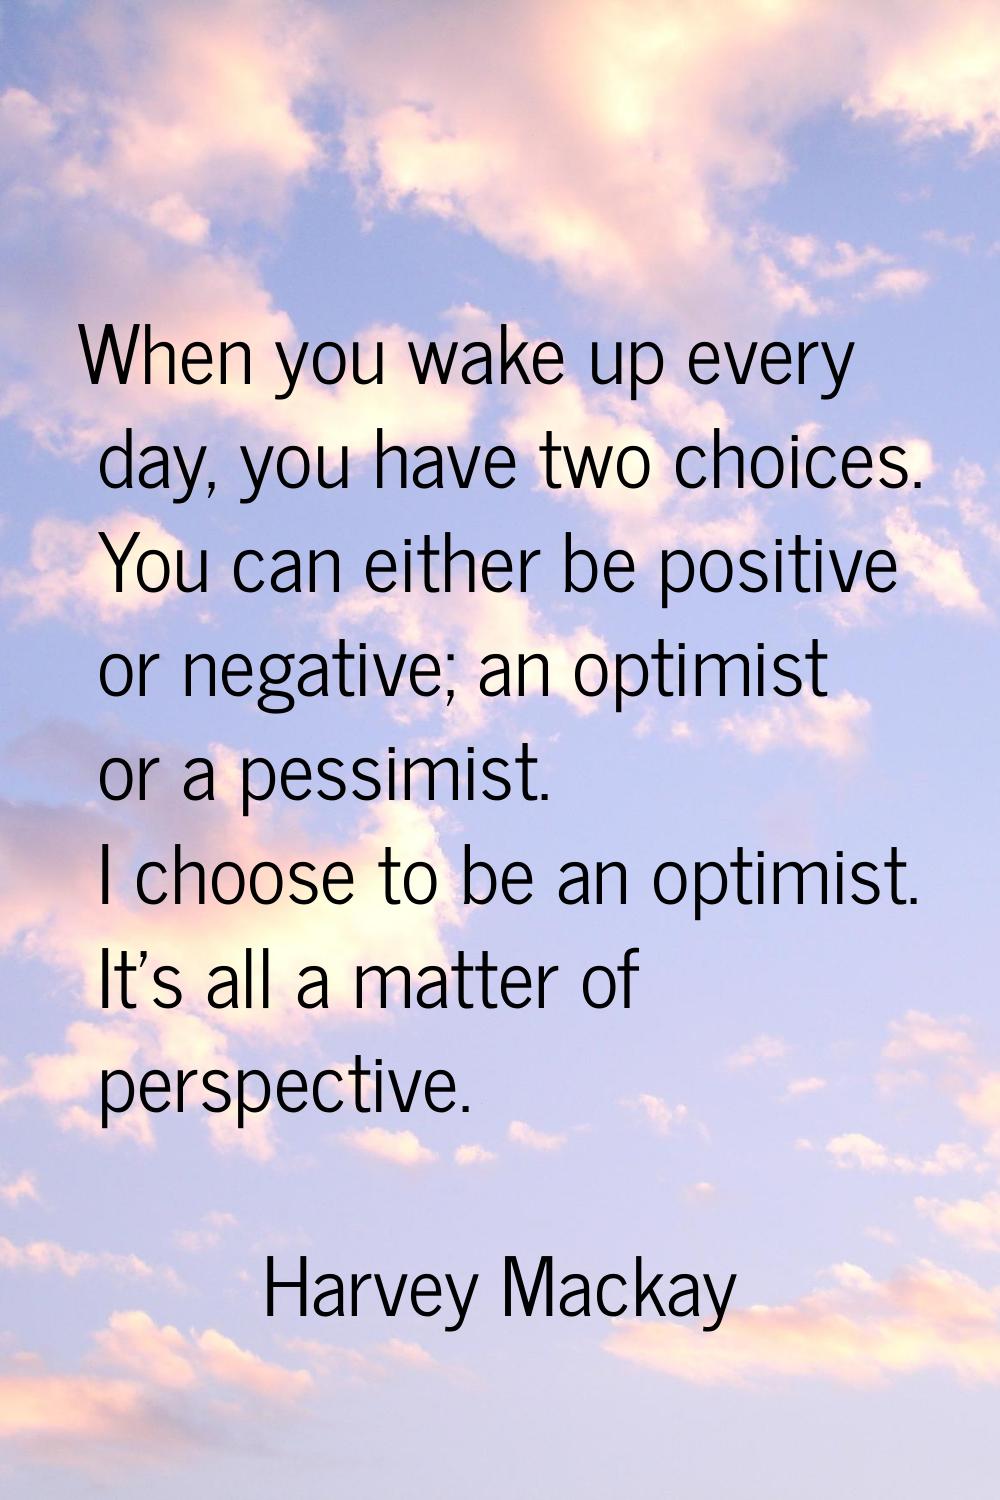 When you wake up every day, you have two choices. You can either be positive or negative; an optimi